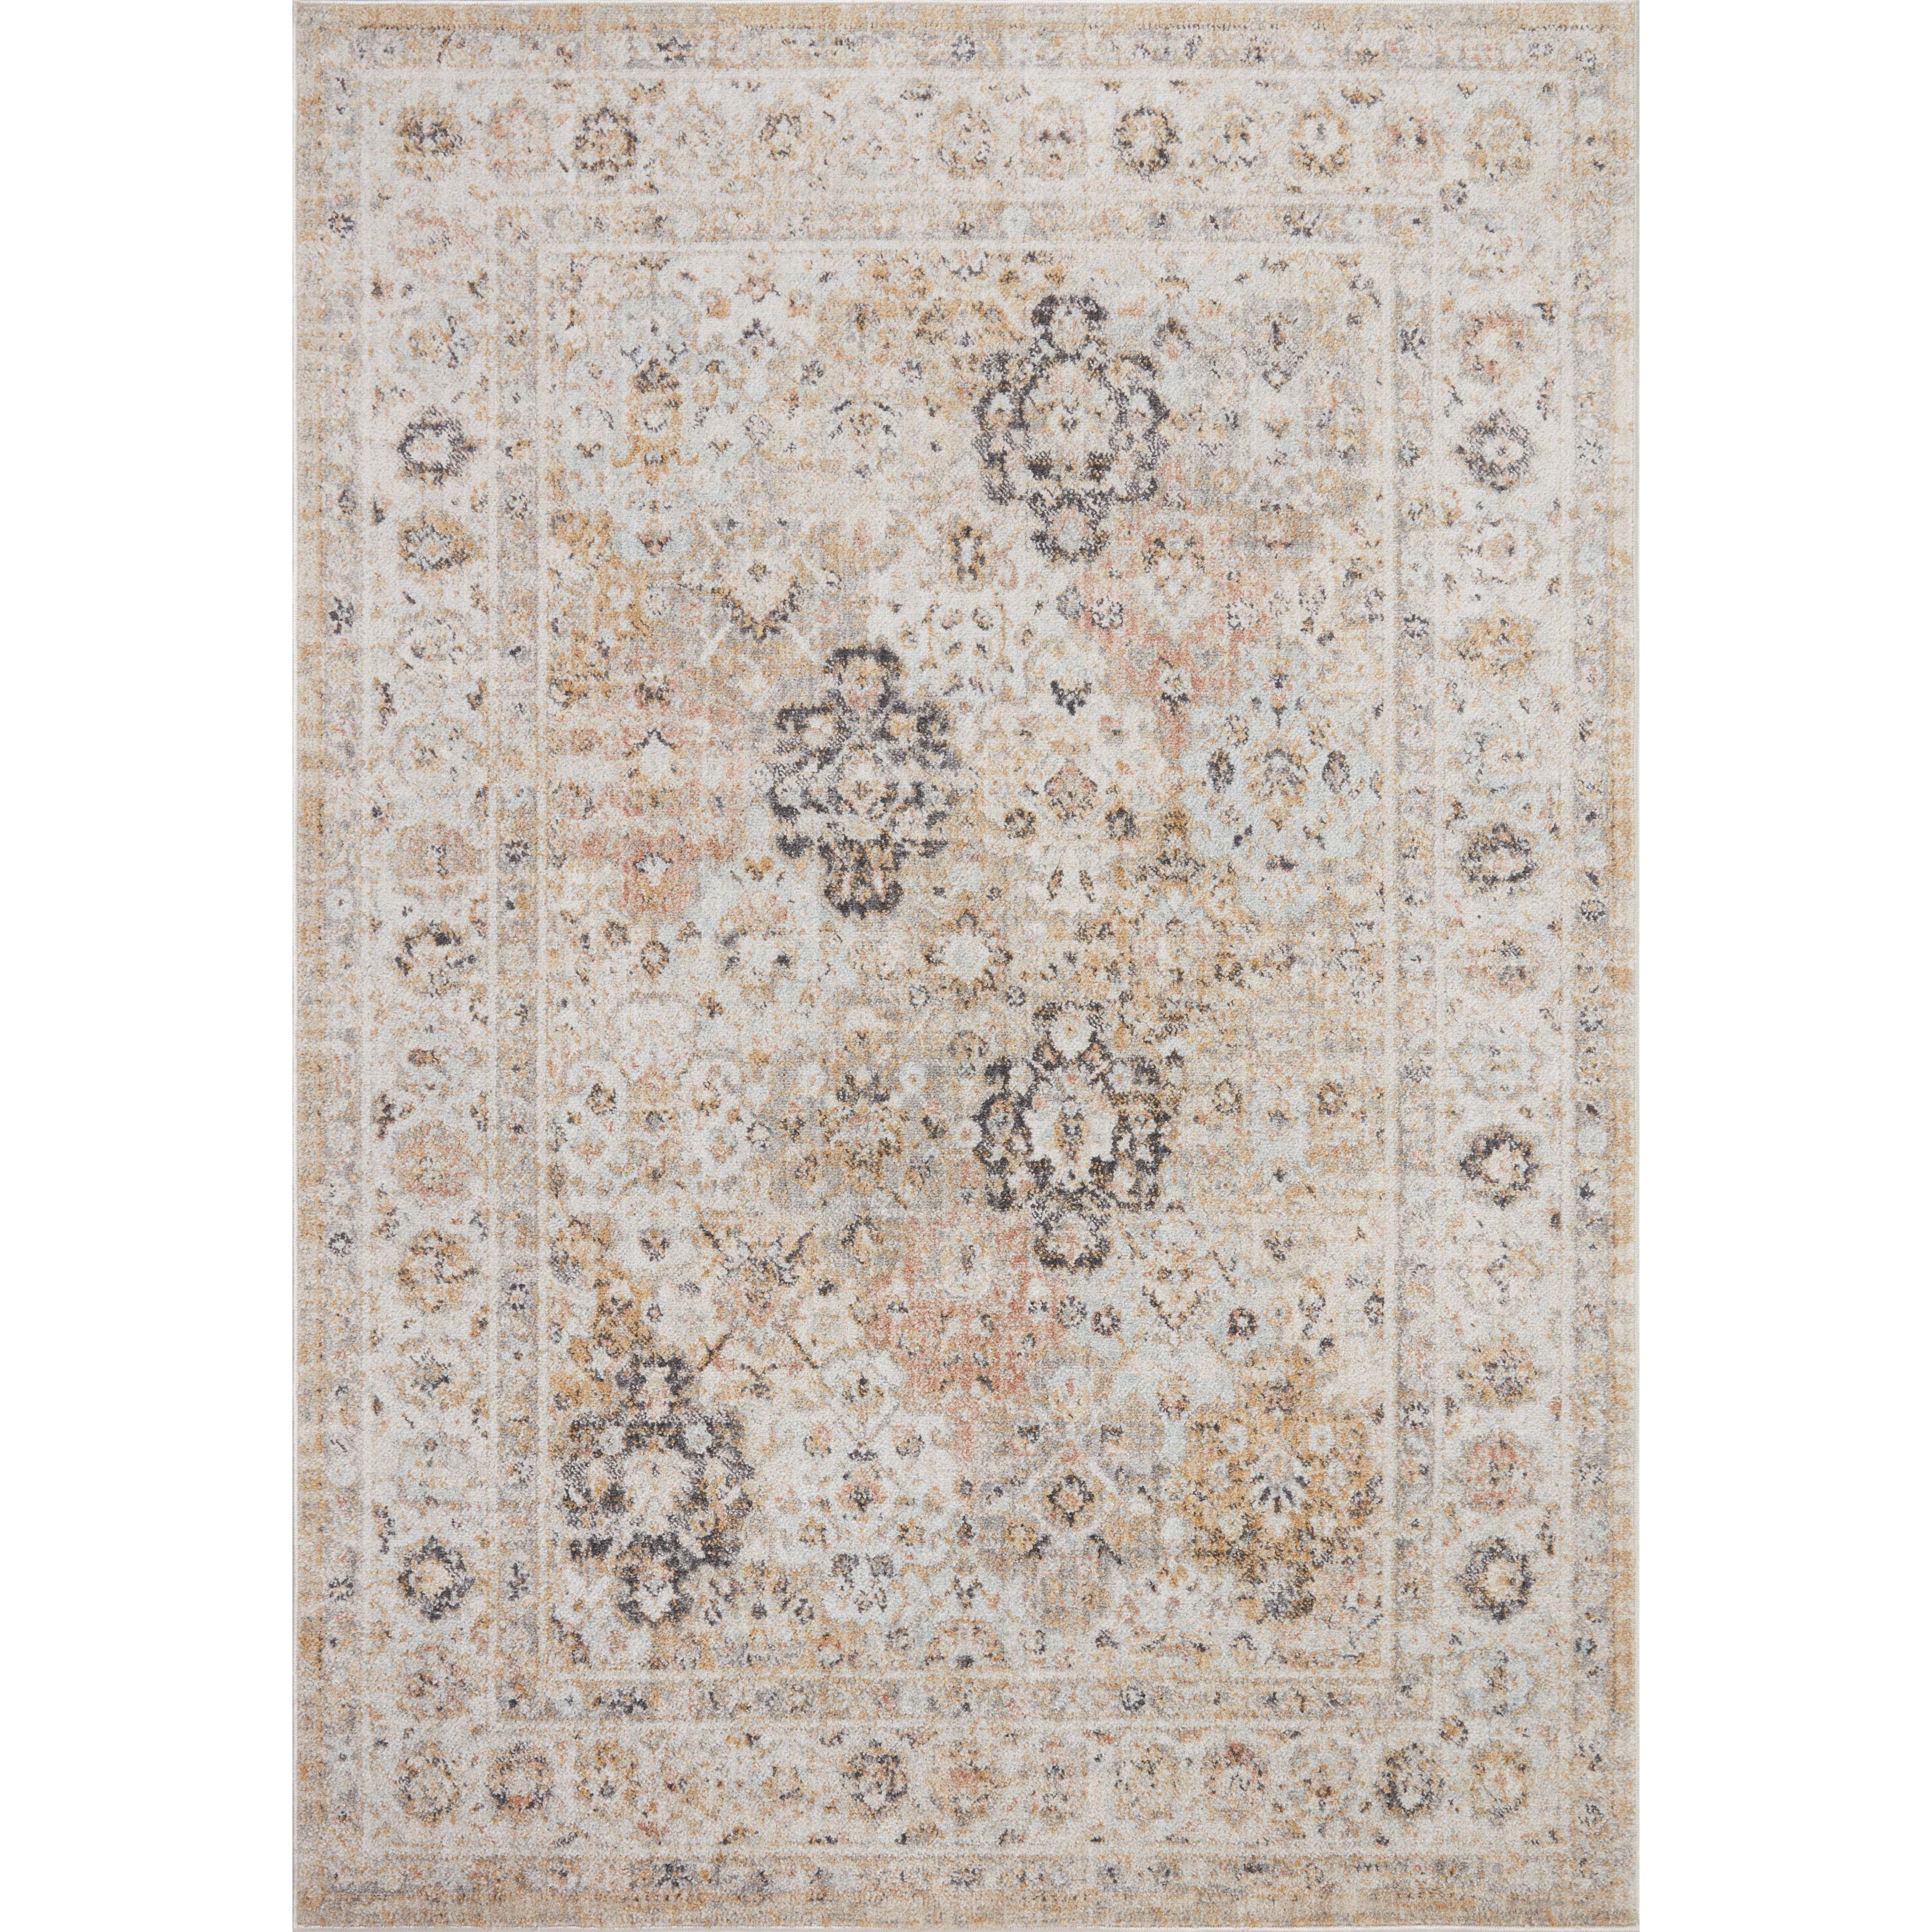 Inspired by antique Turkish Oushak carpets with large-scale motifs, the Monroe Beige / Multi Rug modernizes the traditional design in neutral palettes, many of which have black details that anchor the rug in the room. Monroe is power-loomed of 100% polypropylene for easy care and reliable durability. Amethyst Home provides interior design, new home construction design consulting, vintage area rugs, and lighting in the Monterey metro area.